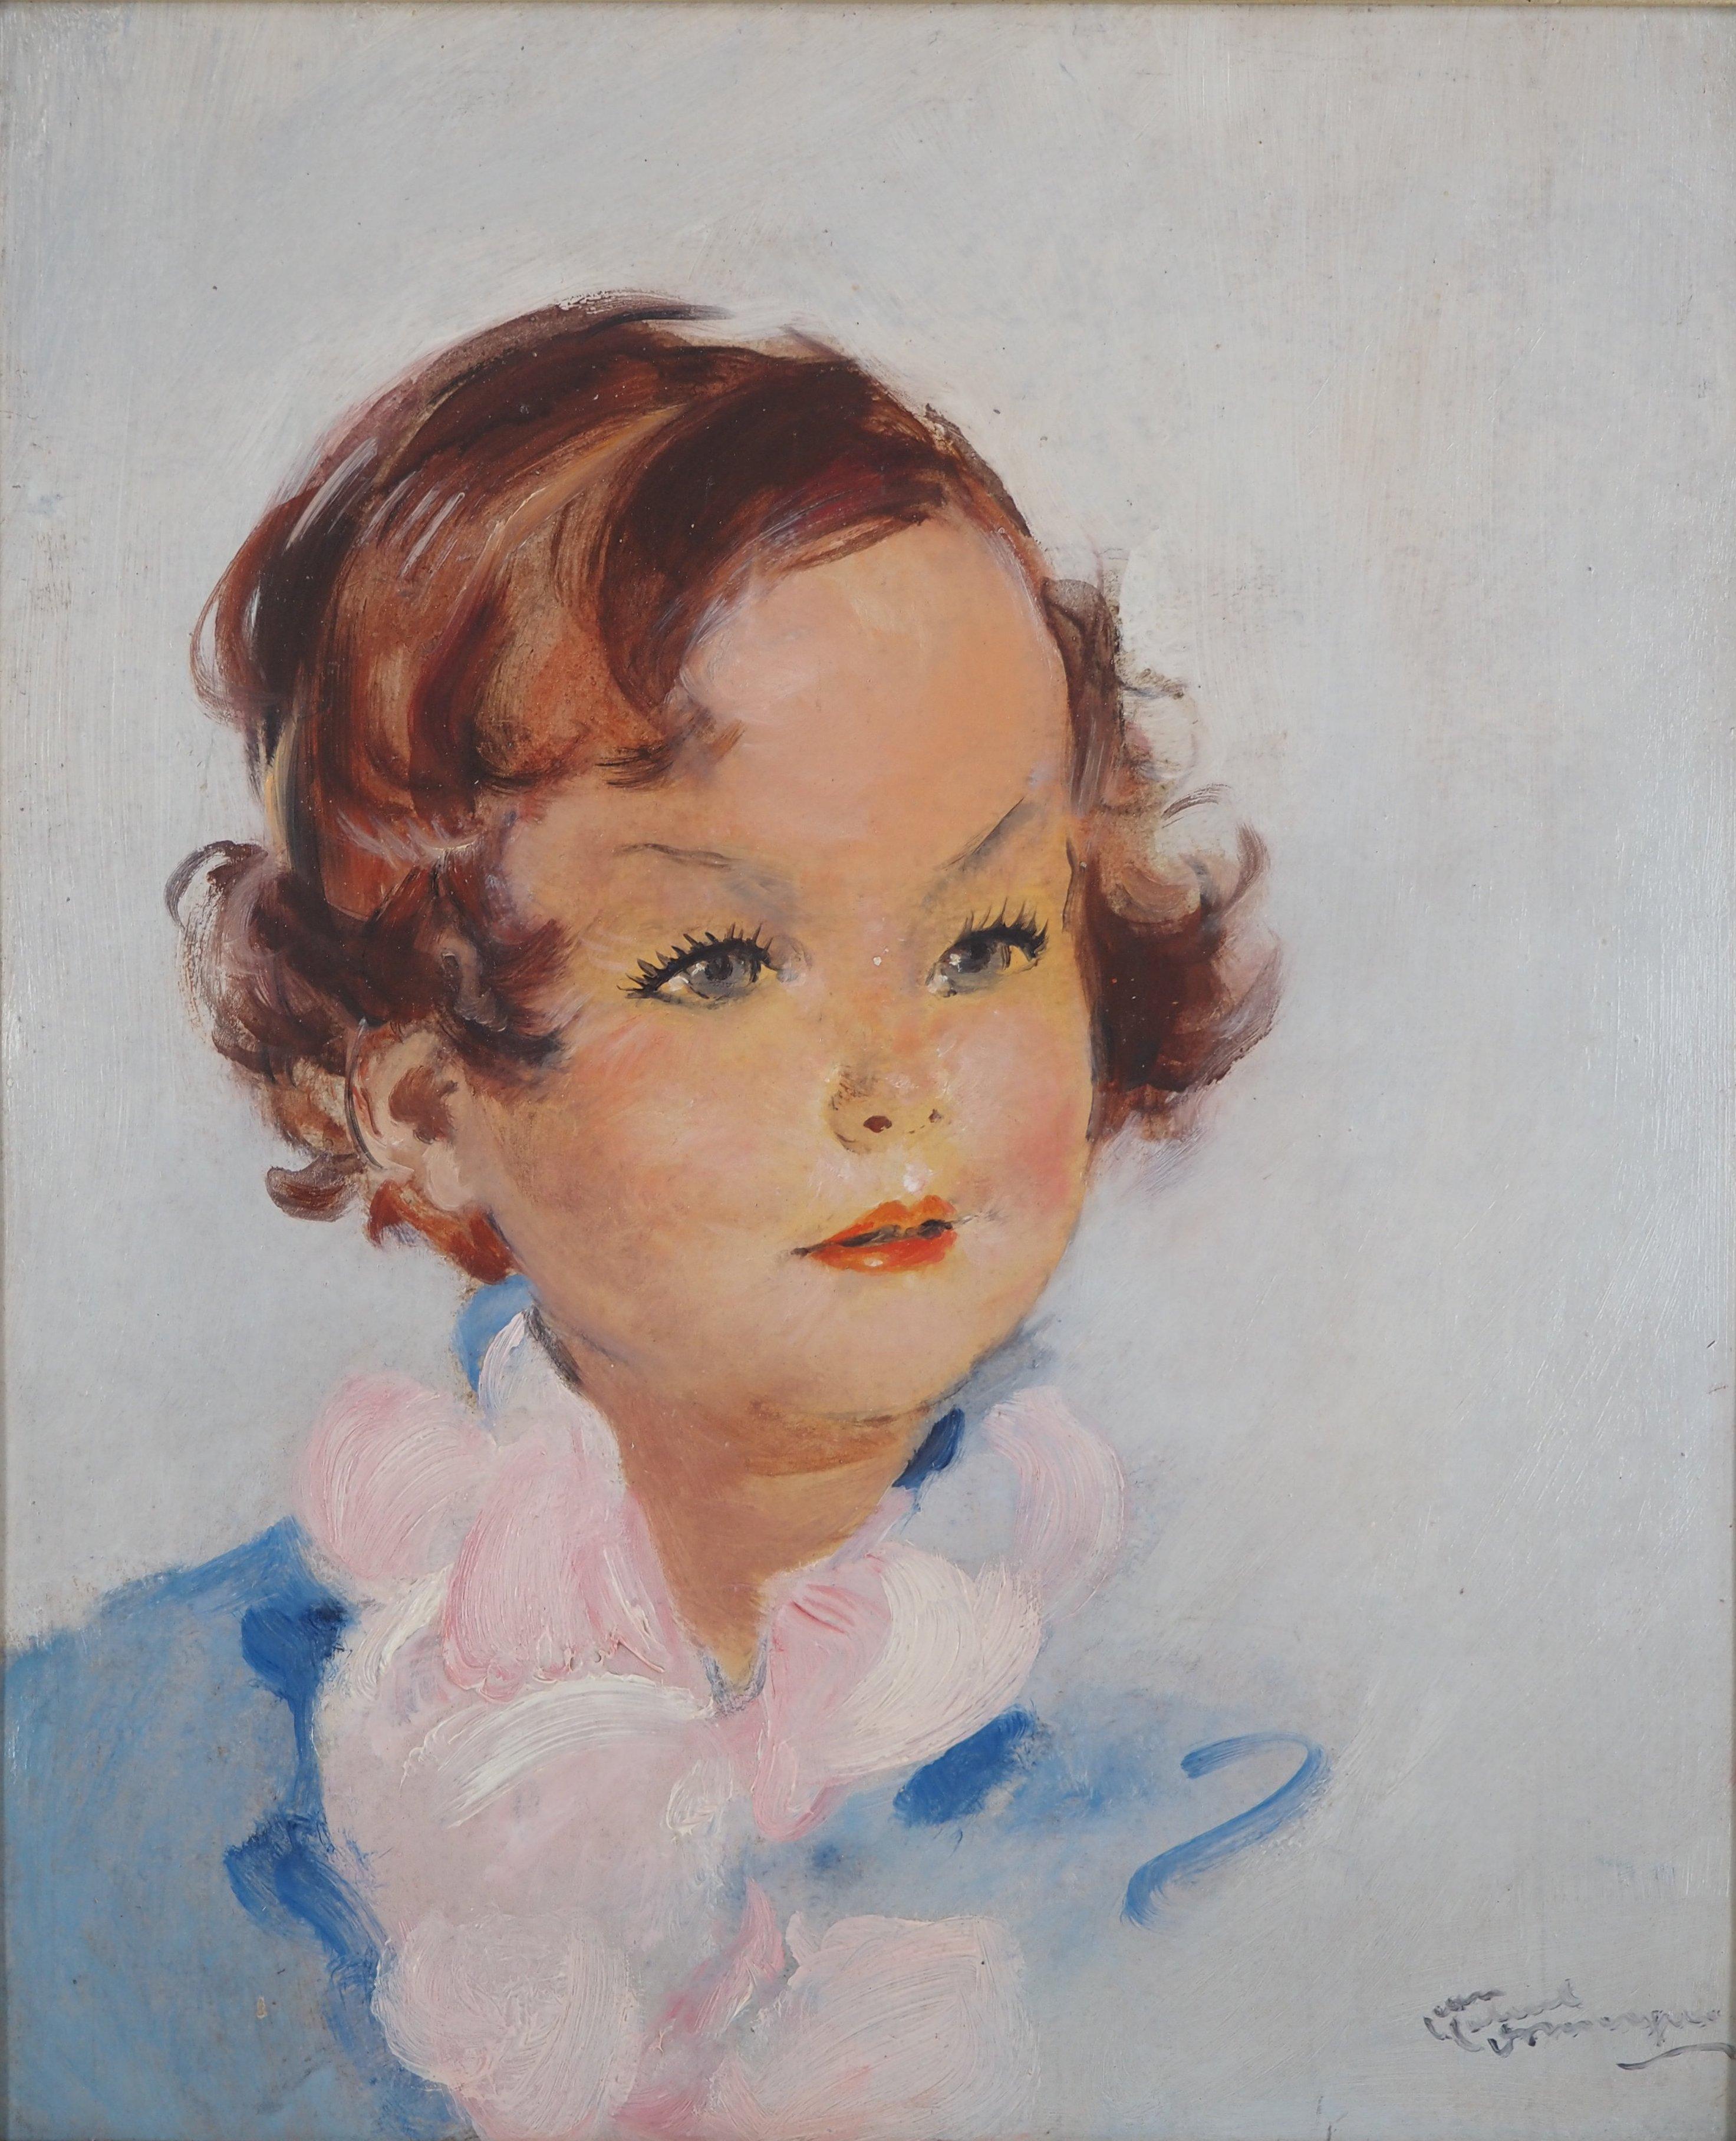 Jean-Gabriel DOMERGUE (1889-1962)
Young Girl with Pink Scarf

Original oil painting on panel
Signed bottom right
On panel 40 x 33 cm (c. 16 x 13 inch) 
Presented in nice vintage wood frame 56 x 49 cm  (c. 22 x 19 inches)

Excellent condition, light